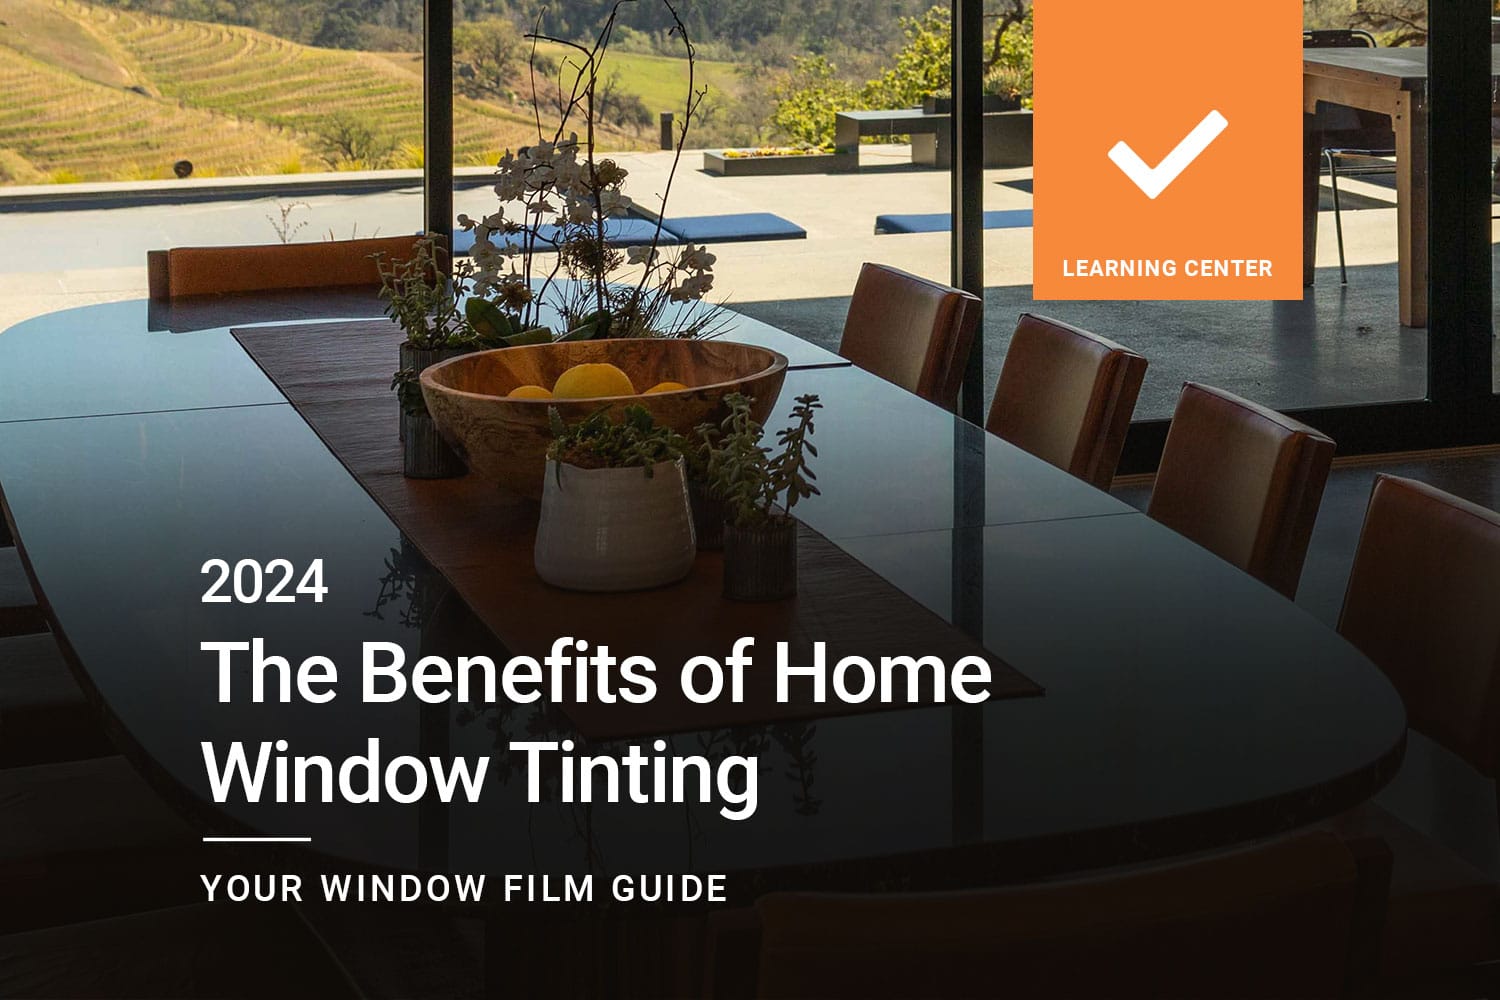 The Benefits of Home Window Tinting in 2024 ClimatePro Cover